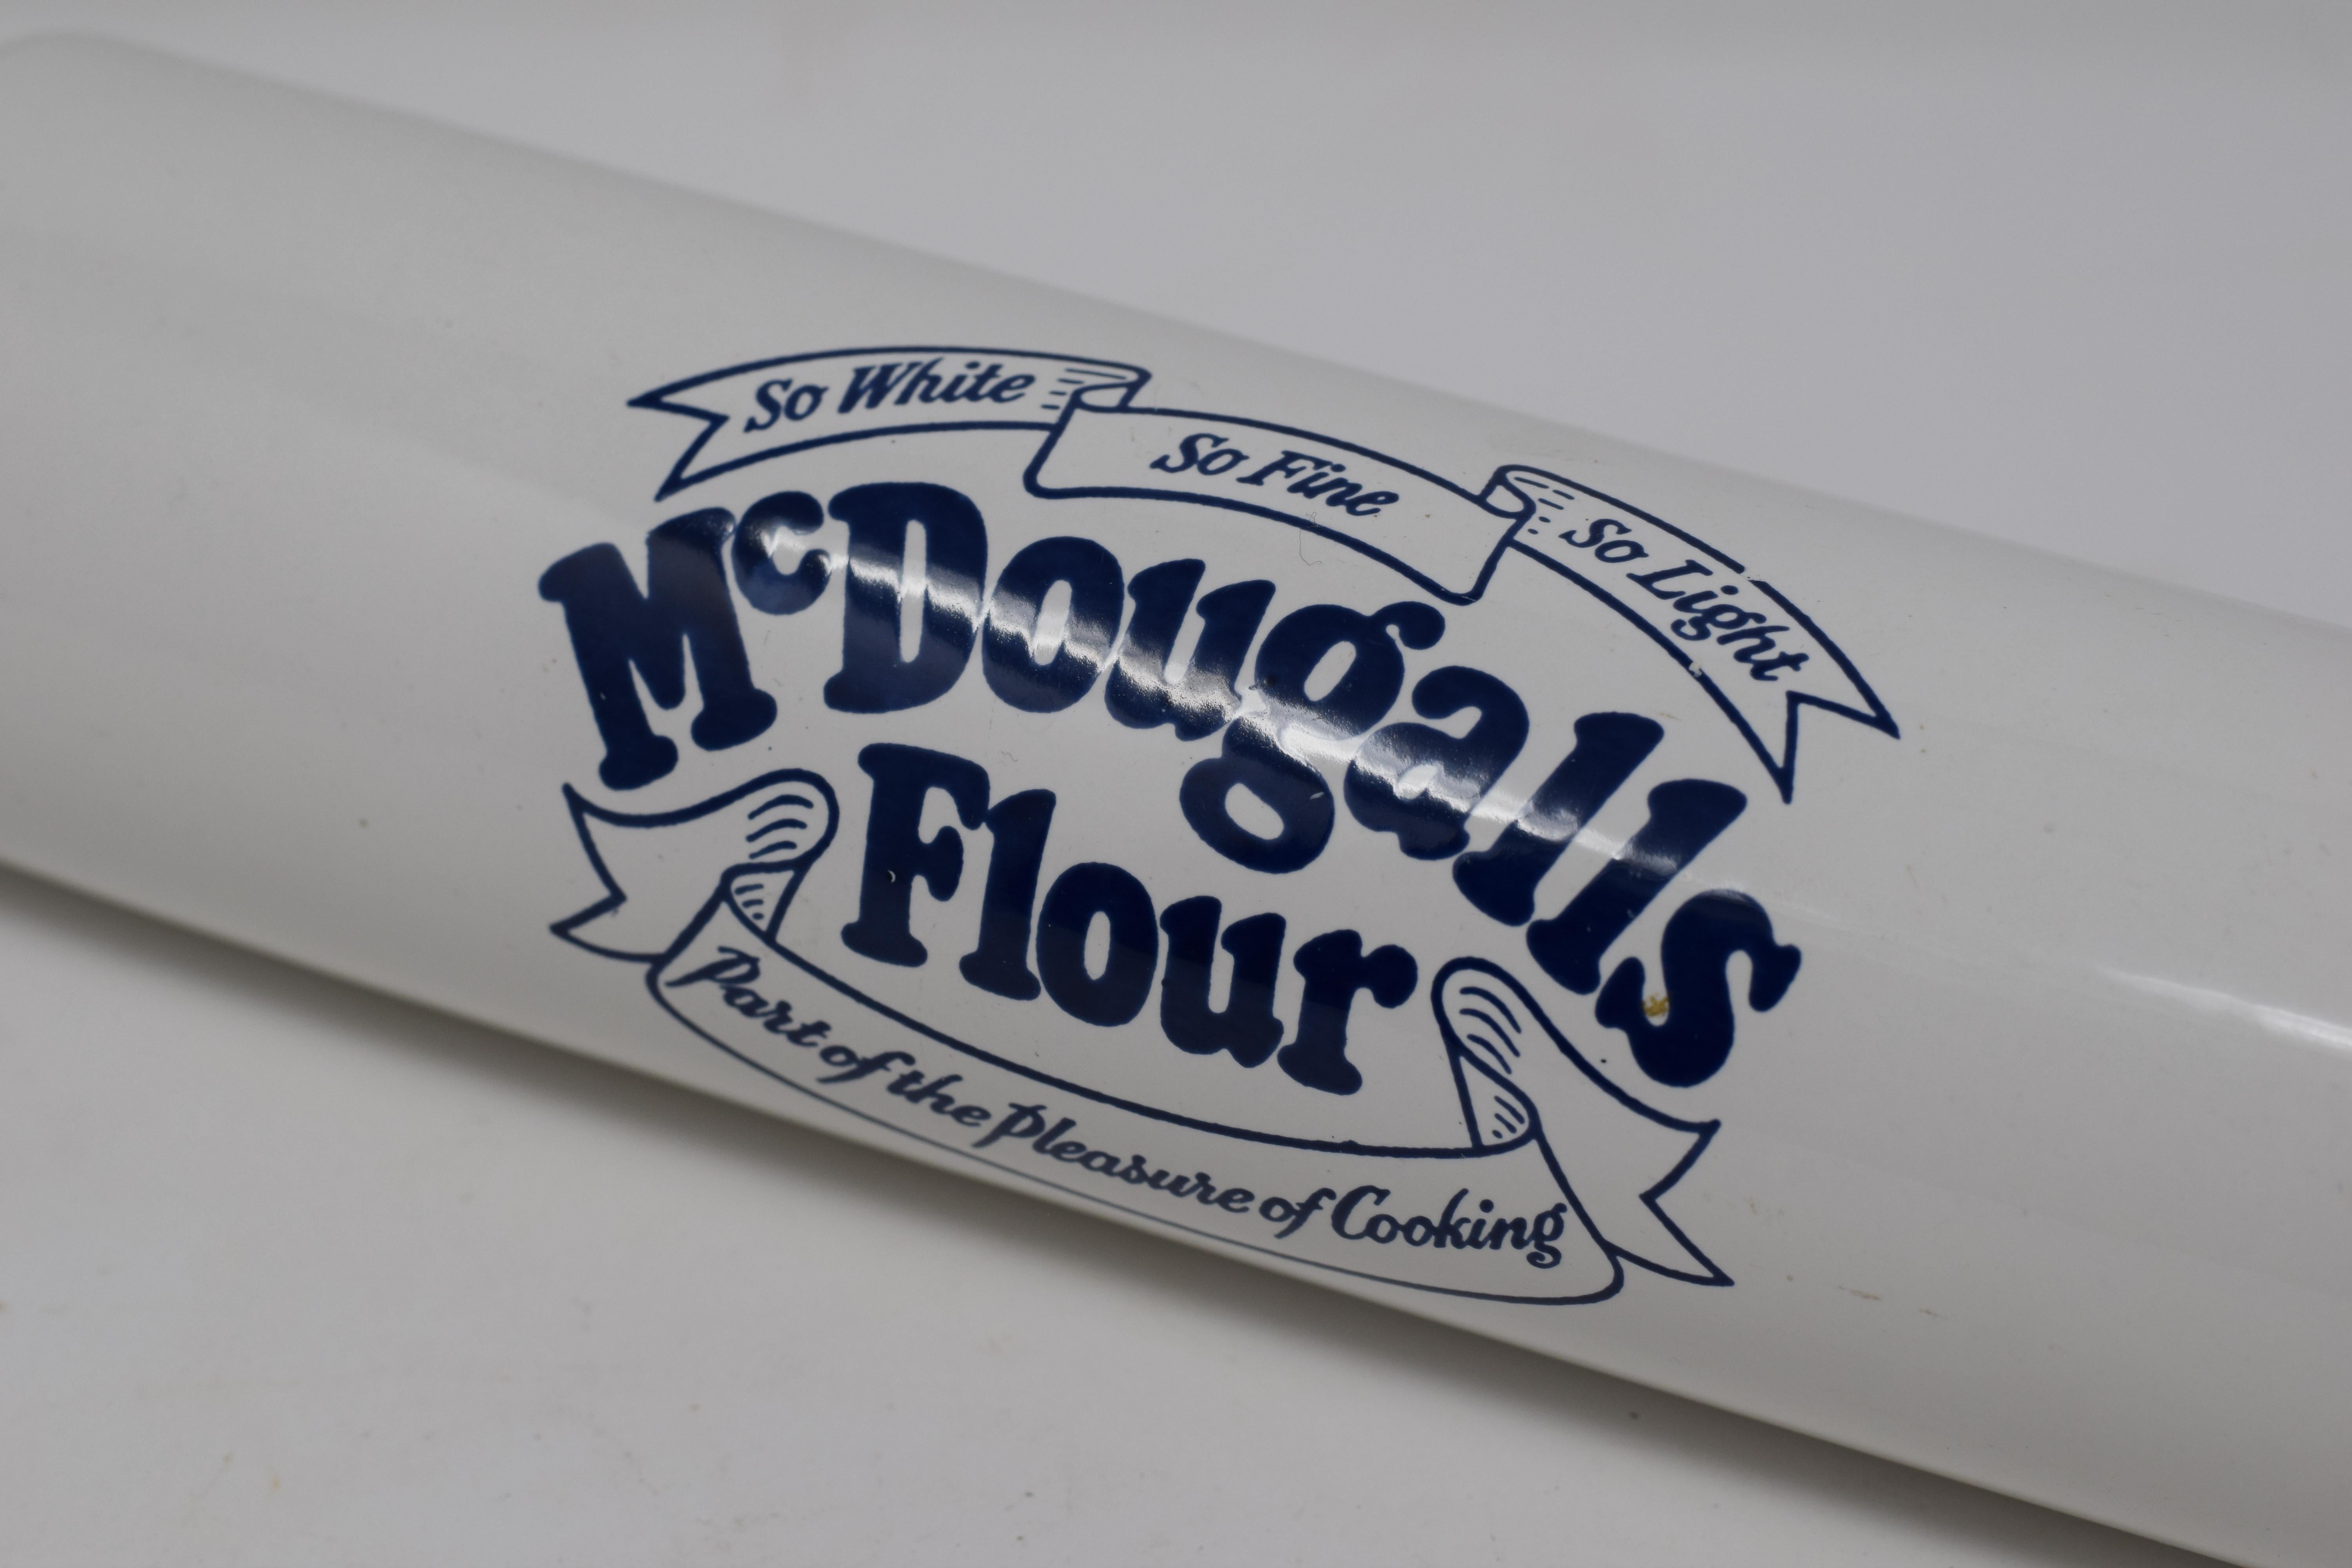 This is a vintage McDougalls advertising rolling pin with blue transfer print. The rolling pin features a central pin with wood handles at each end. McDougalls has been providing consumers with high quality flours for baking since the English